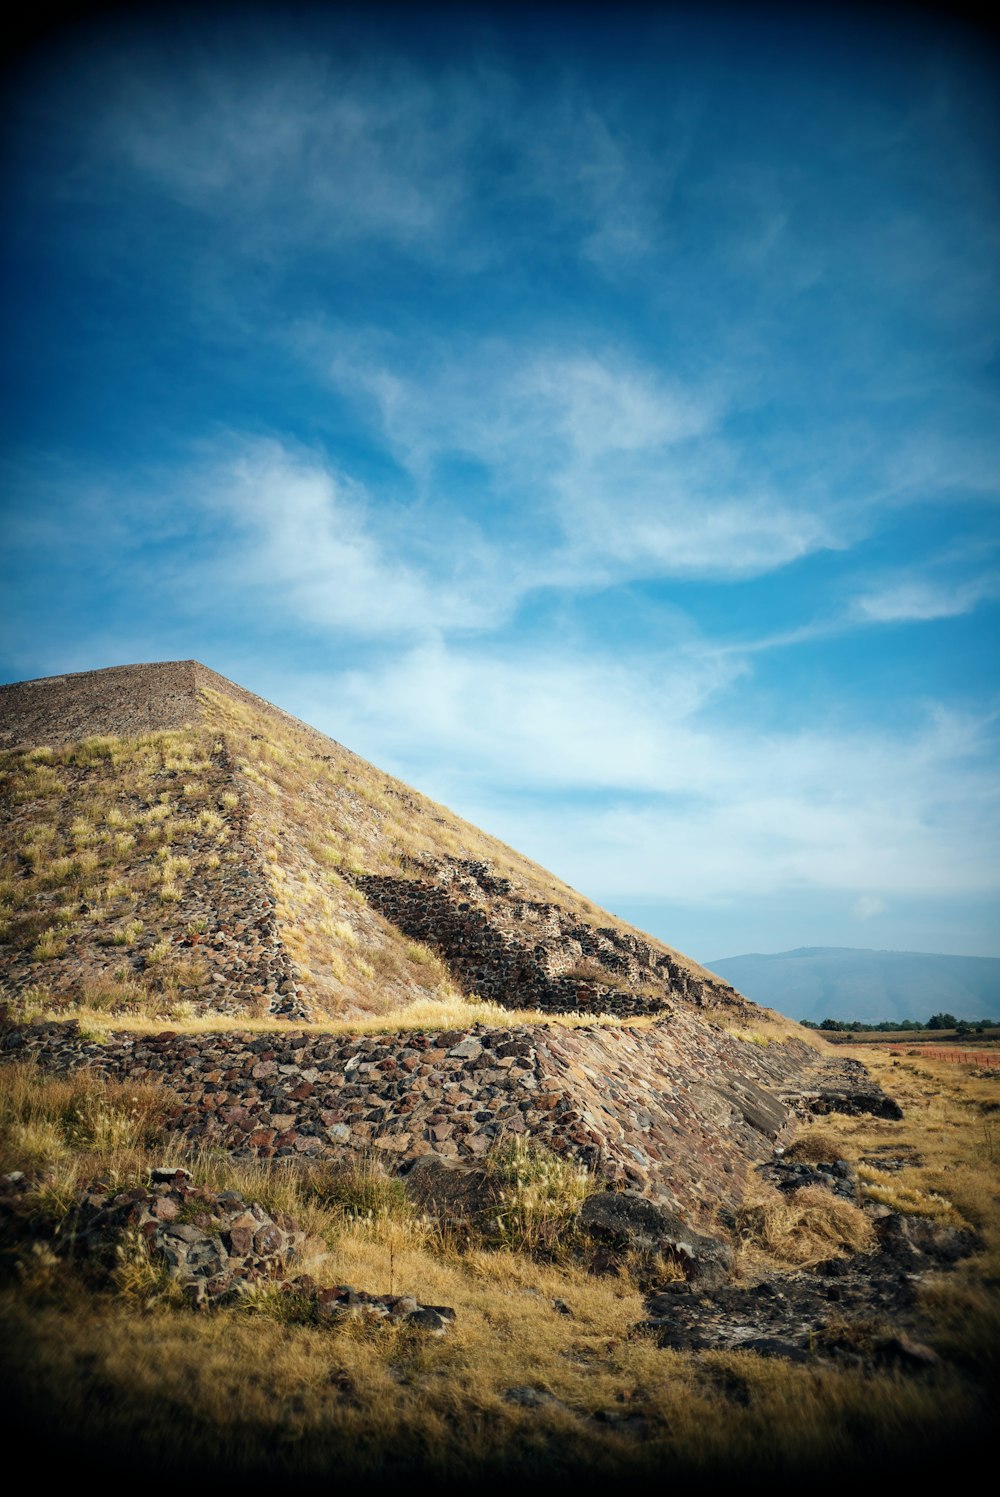 a very tall pyramid sitting on top of a dry grass field